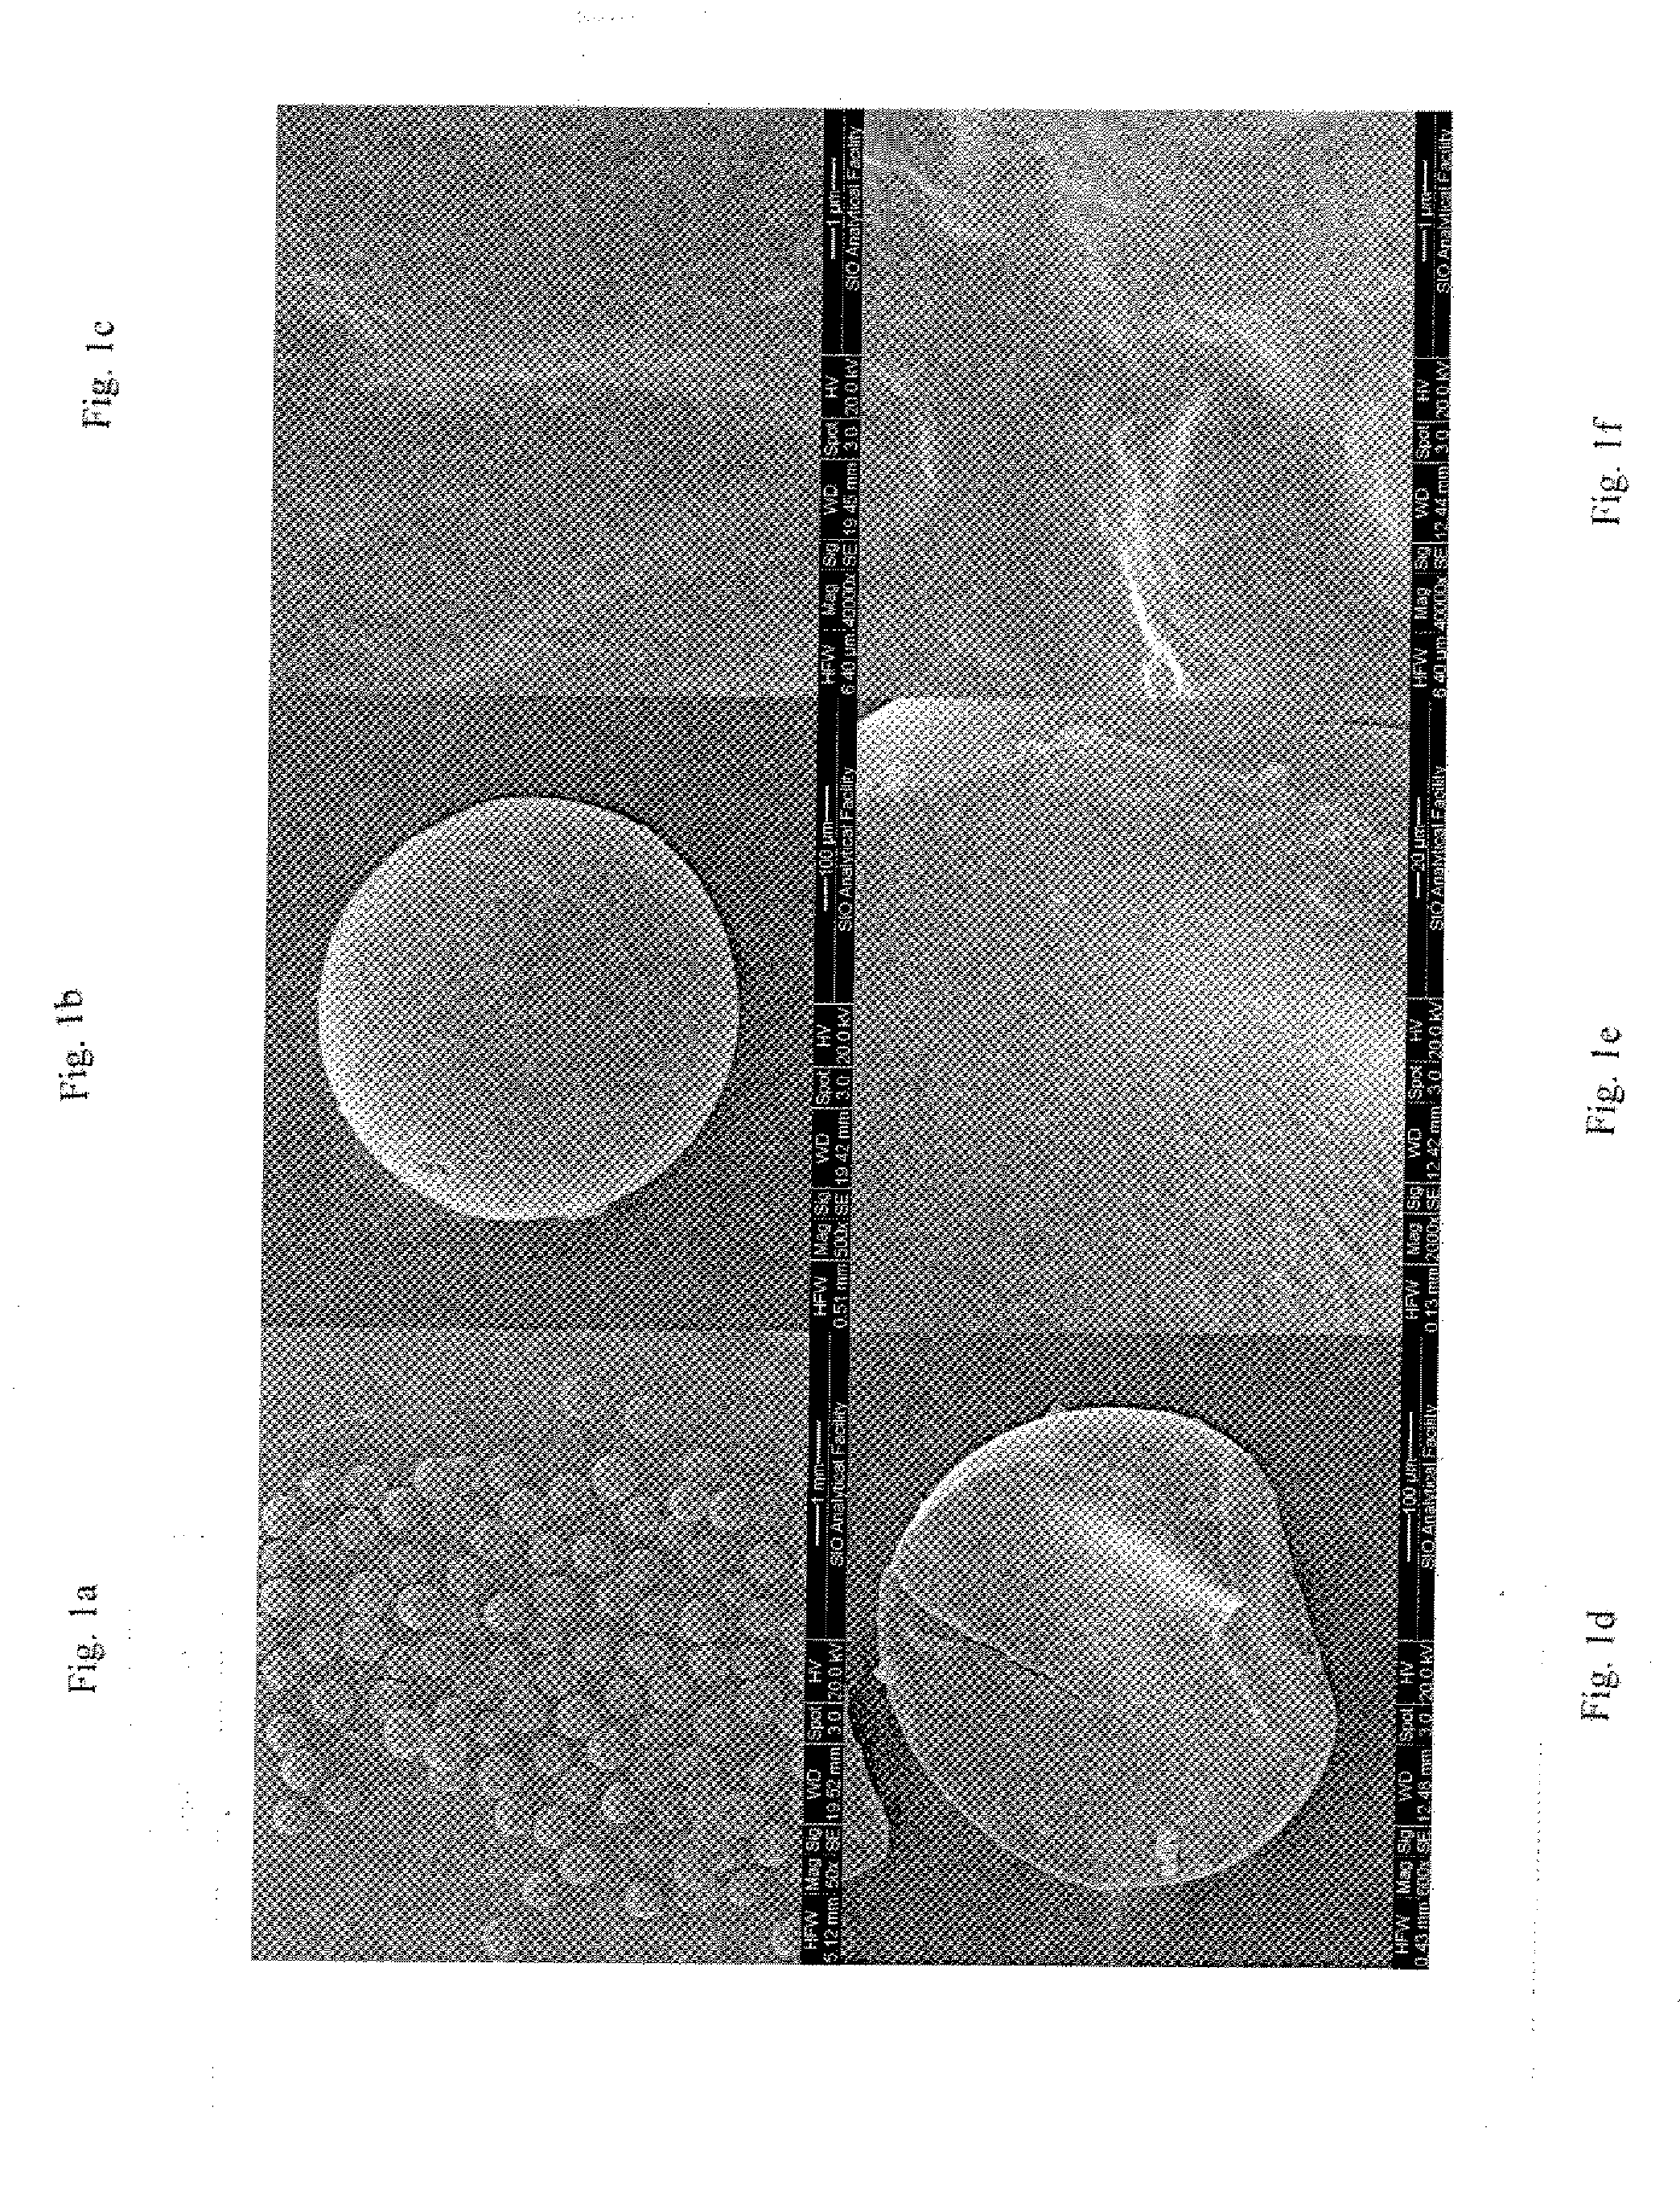 Porous intravascular embolization particles and related methods